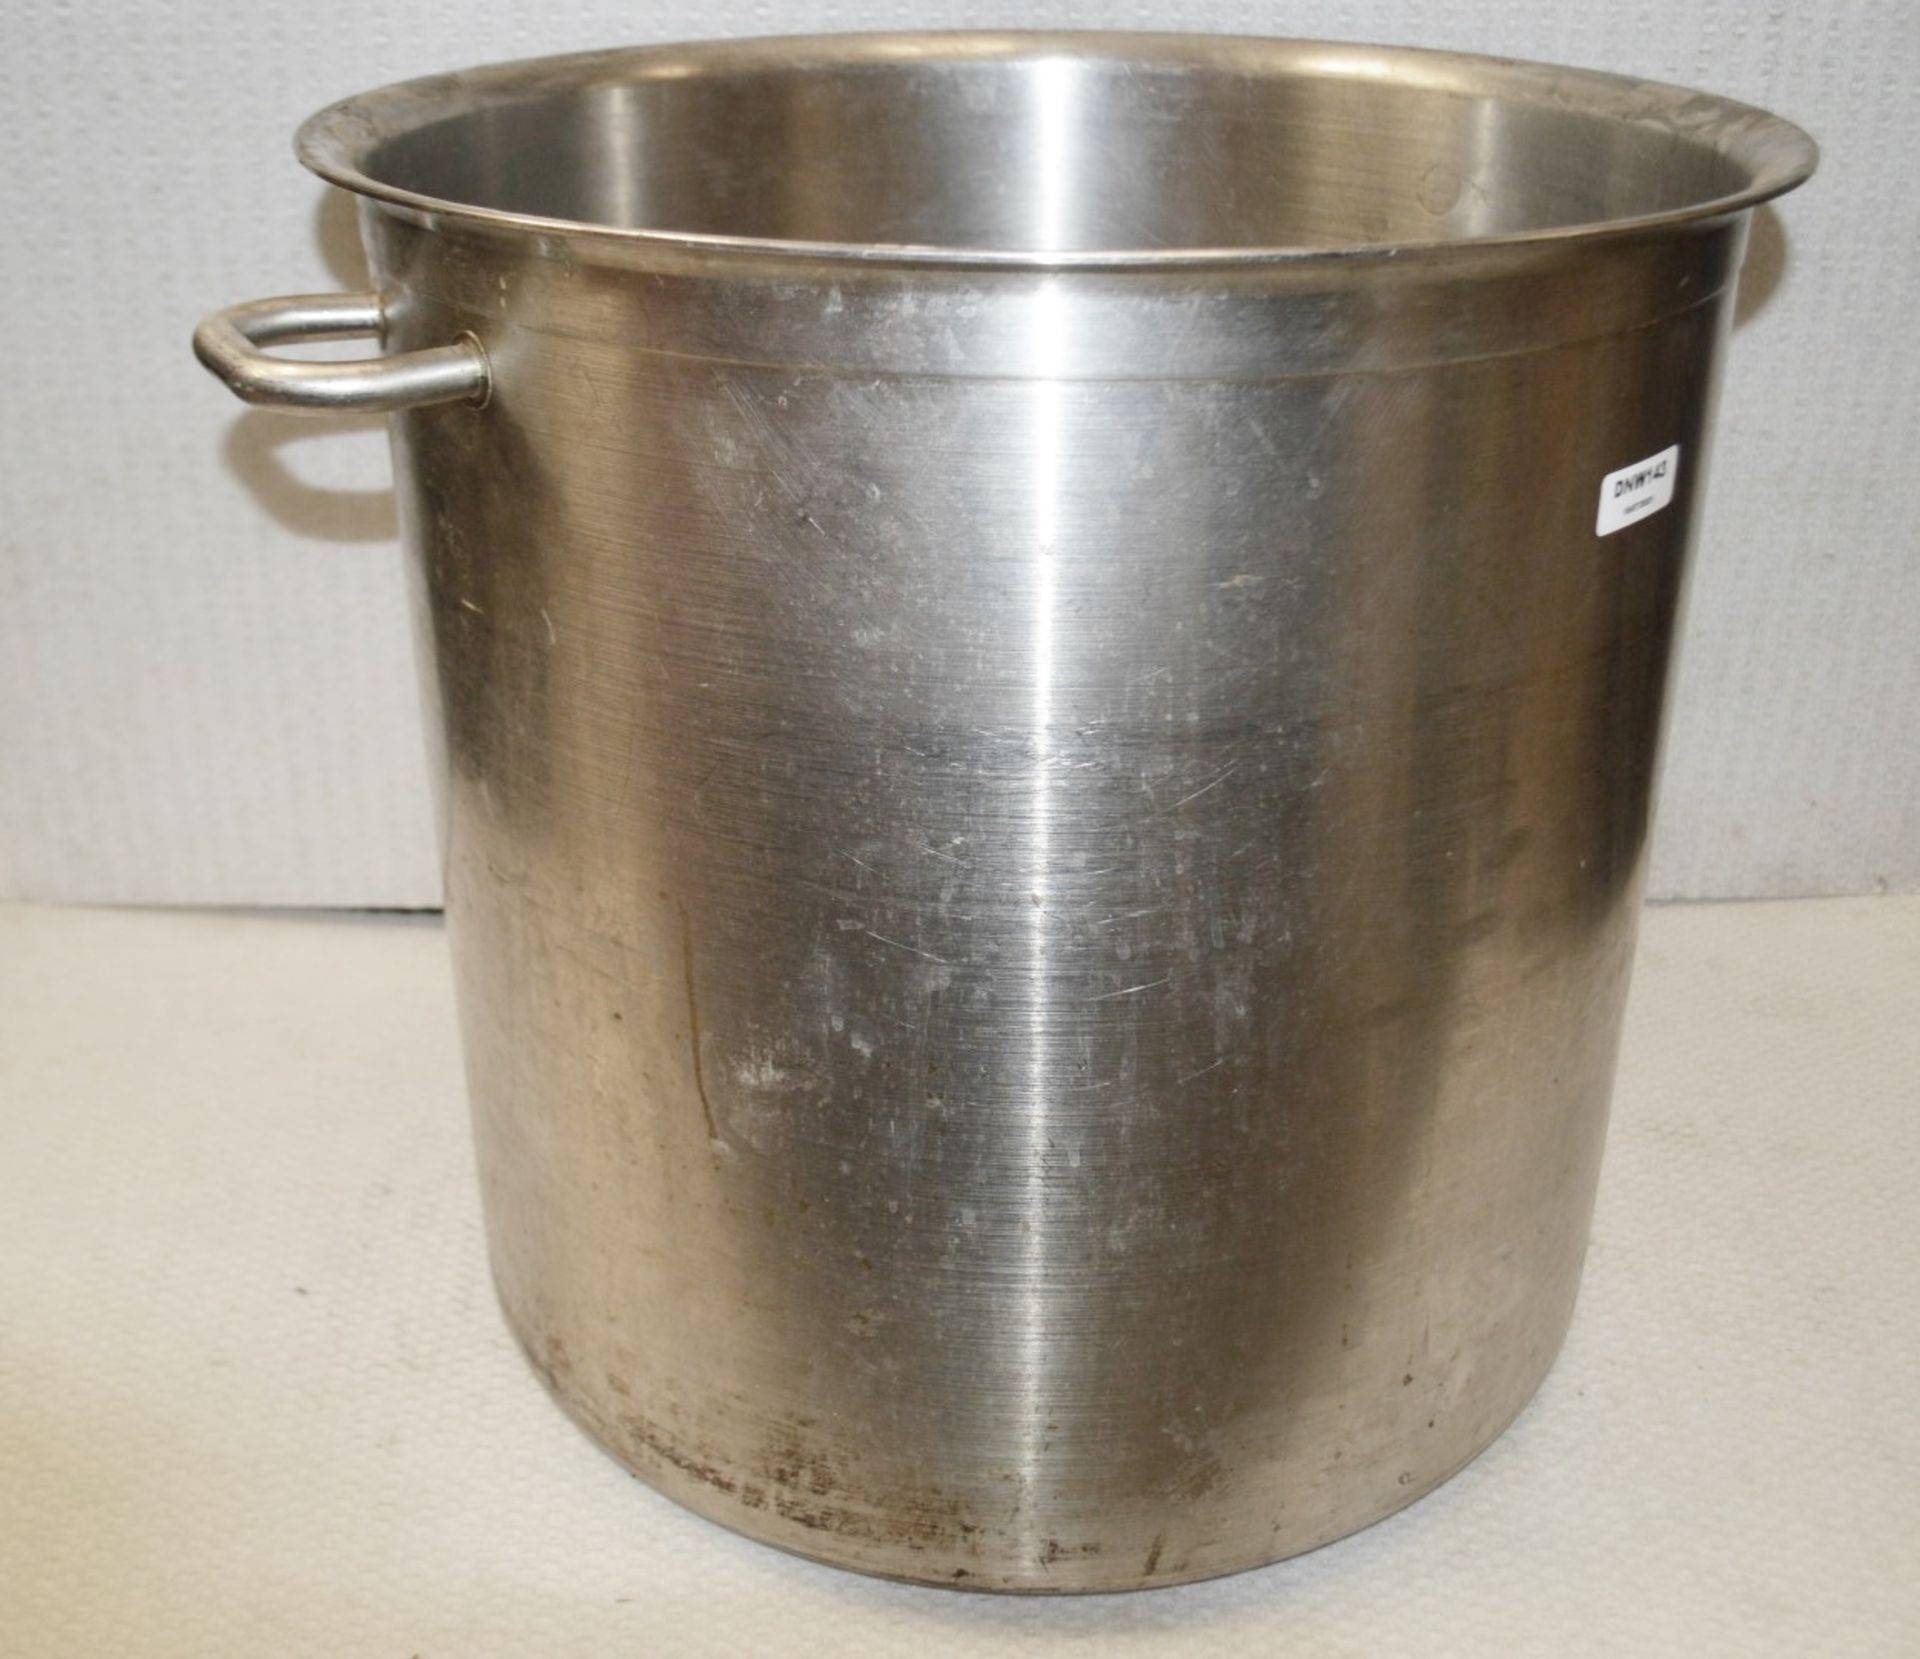 1 x Large Stainless Steel Cooking Pan - Dimensions: L54 x W54 x D50cm - Recently Removed From a - Image 2 of 3